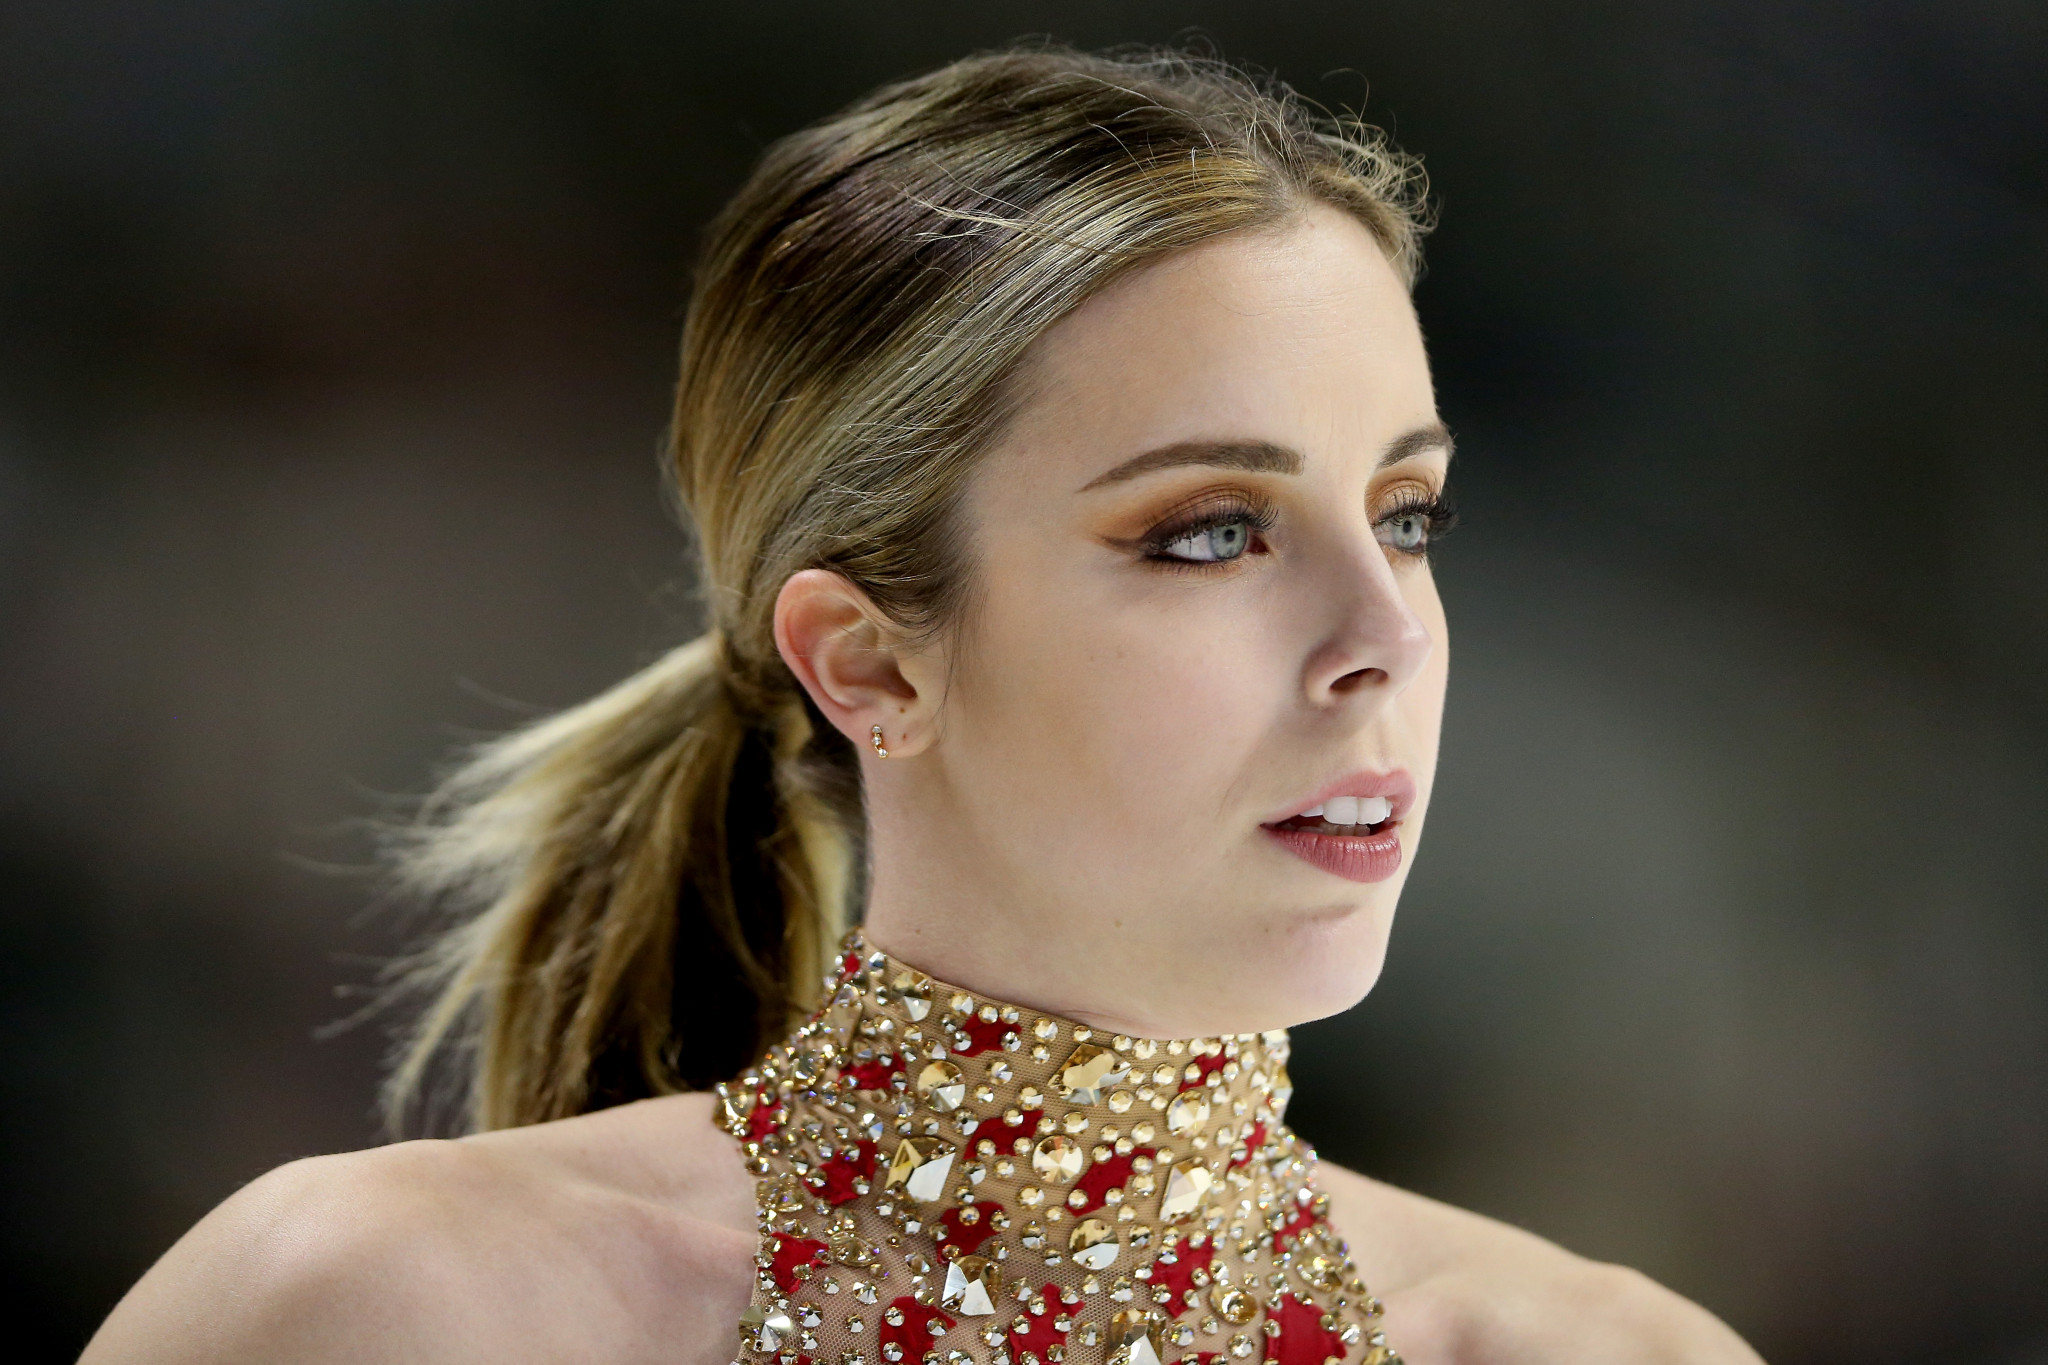 Ashley Wagner made the revelation in an article on USA Today ©Getty Images